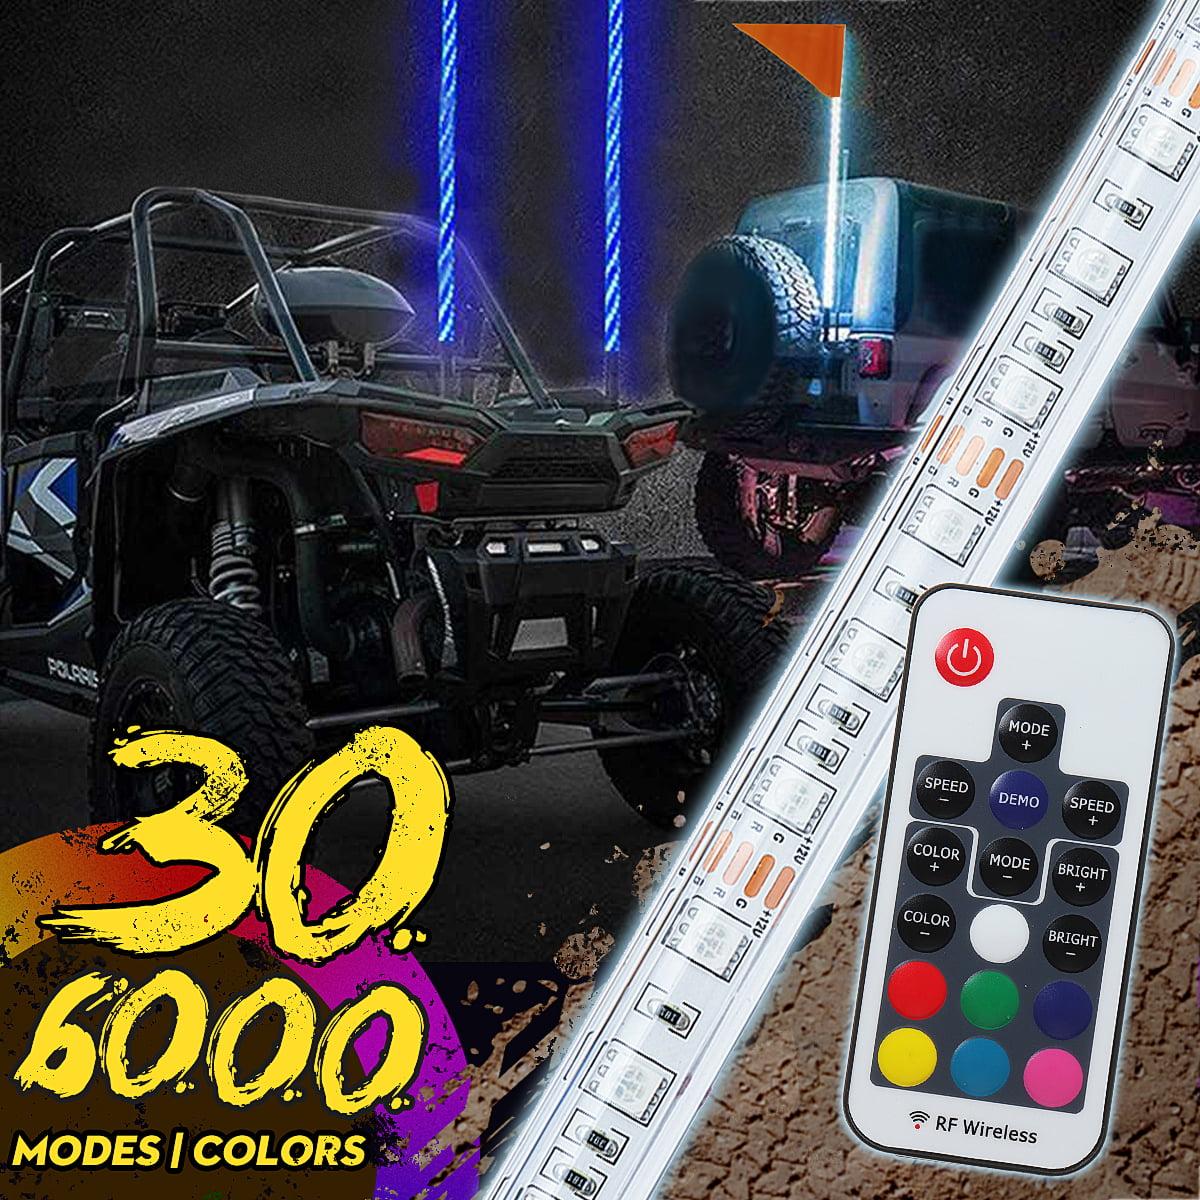 omotor 2pcs 3ft LED Whip Light with Remote Control Spiral RGB Chase Light Offroad 360°Spiraling Rising Dream Wrapped Dancing Whips 